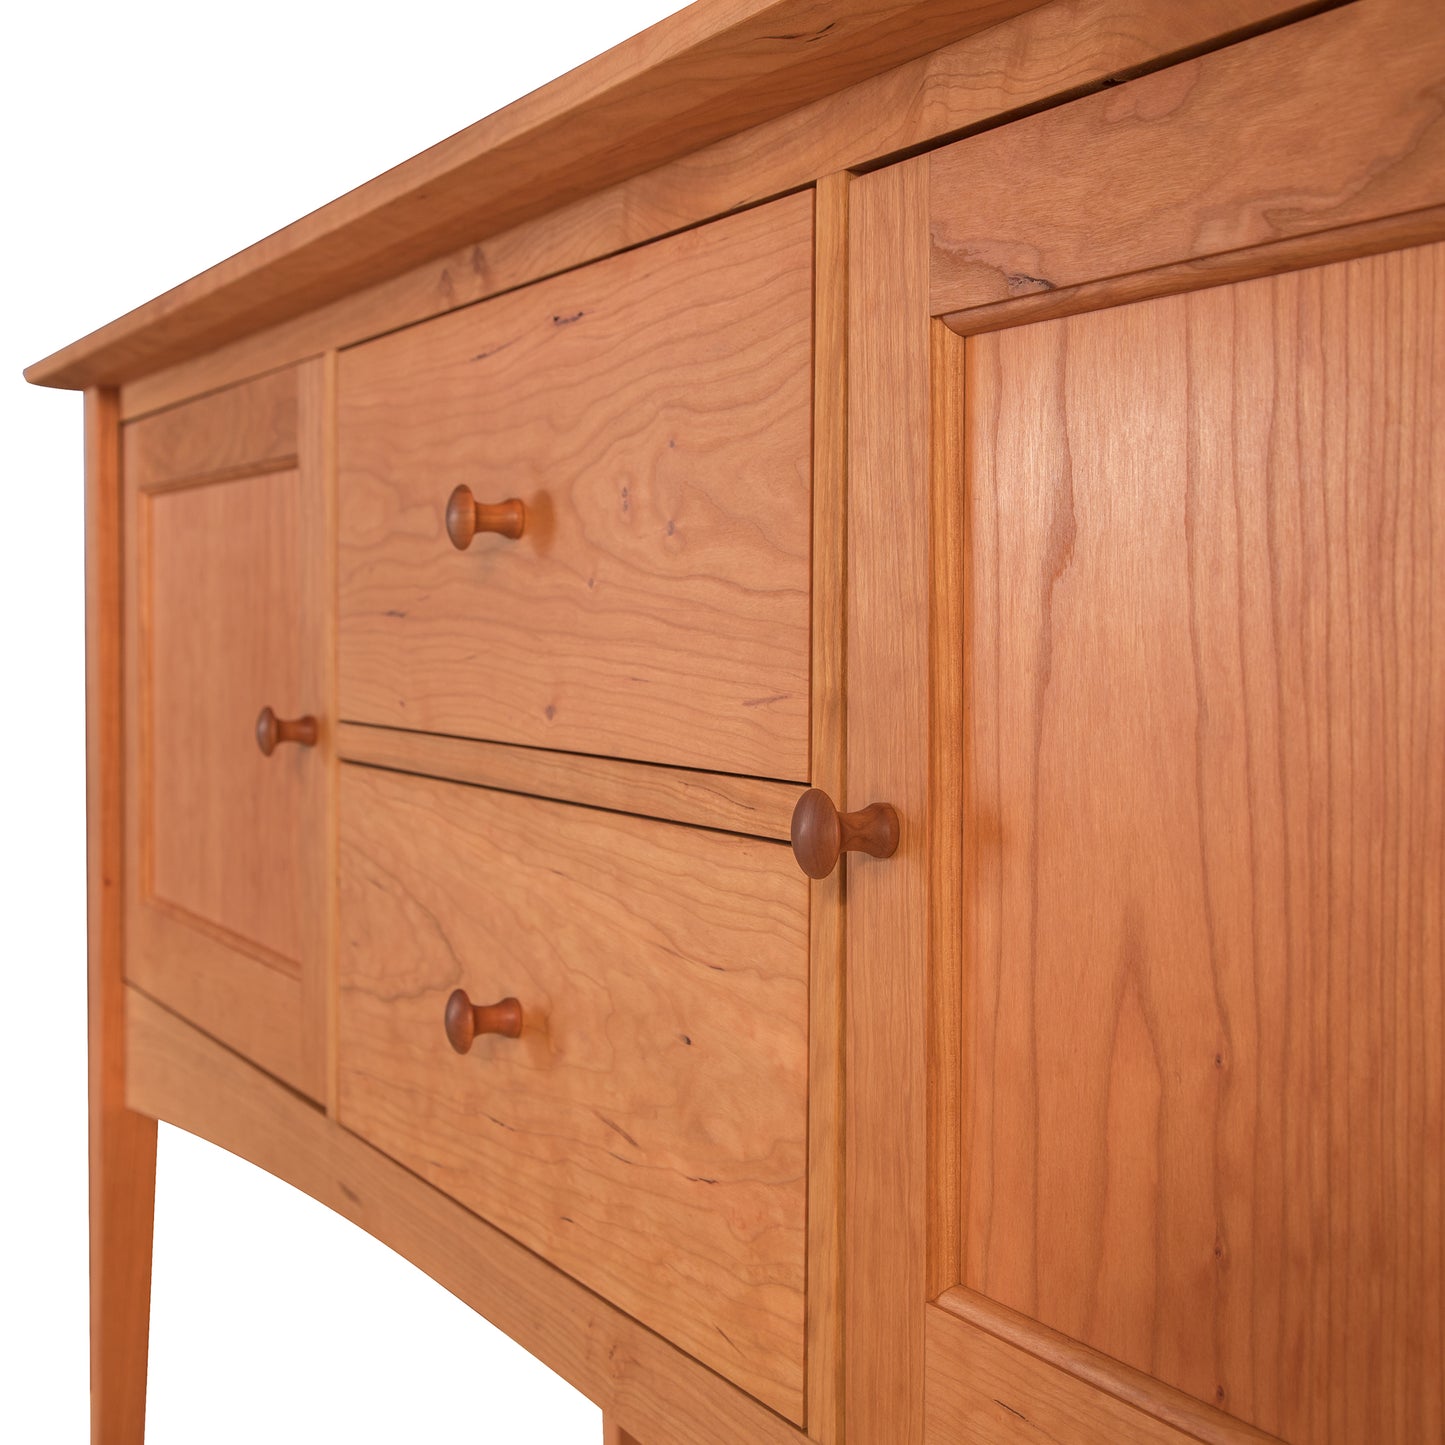 A Maple Corner Woodworks American Shaker Hunt Board with drawers and knobs showcasing American Shaker influence.